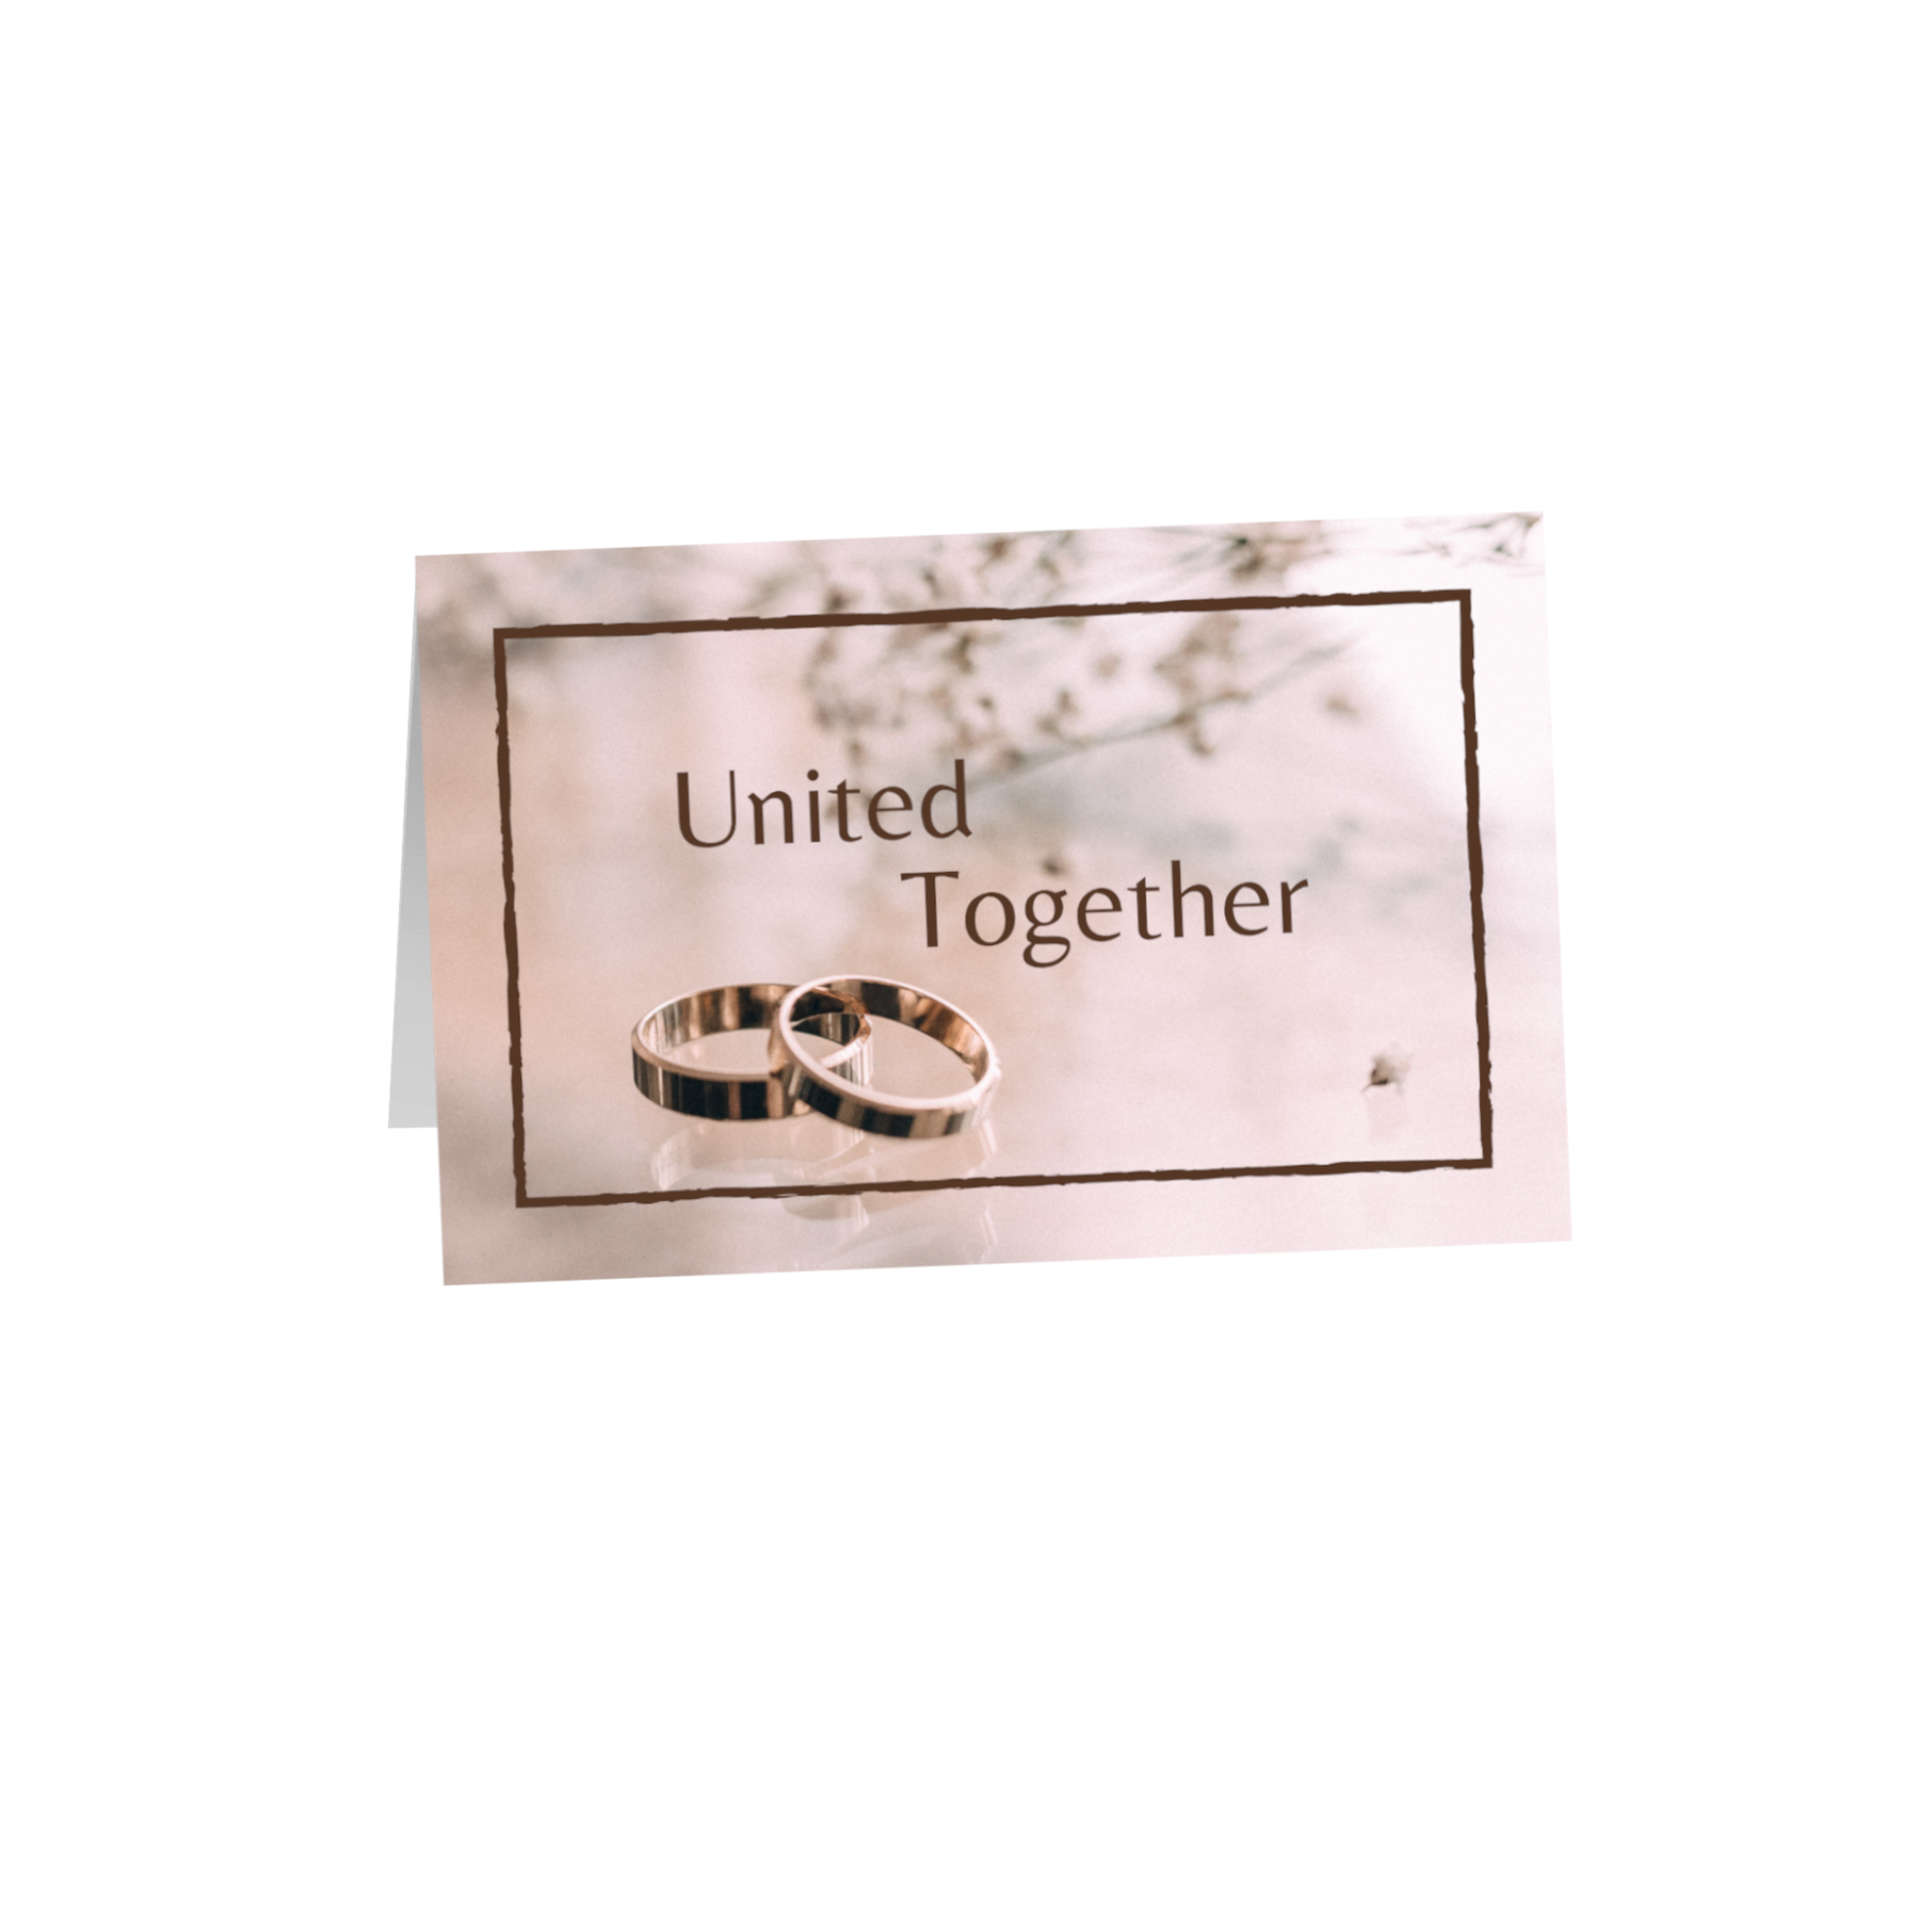 United Together 8.5x5.5 Greeting Card